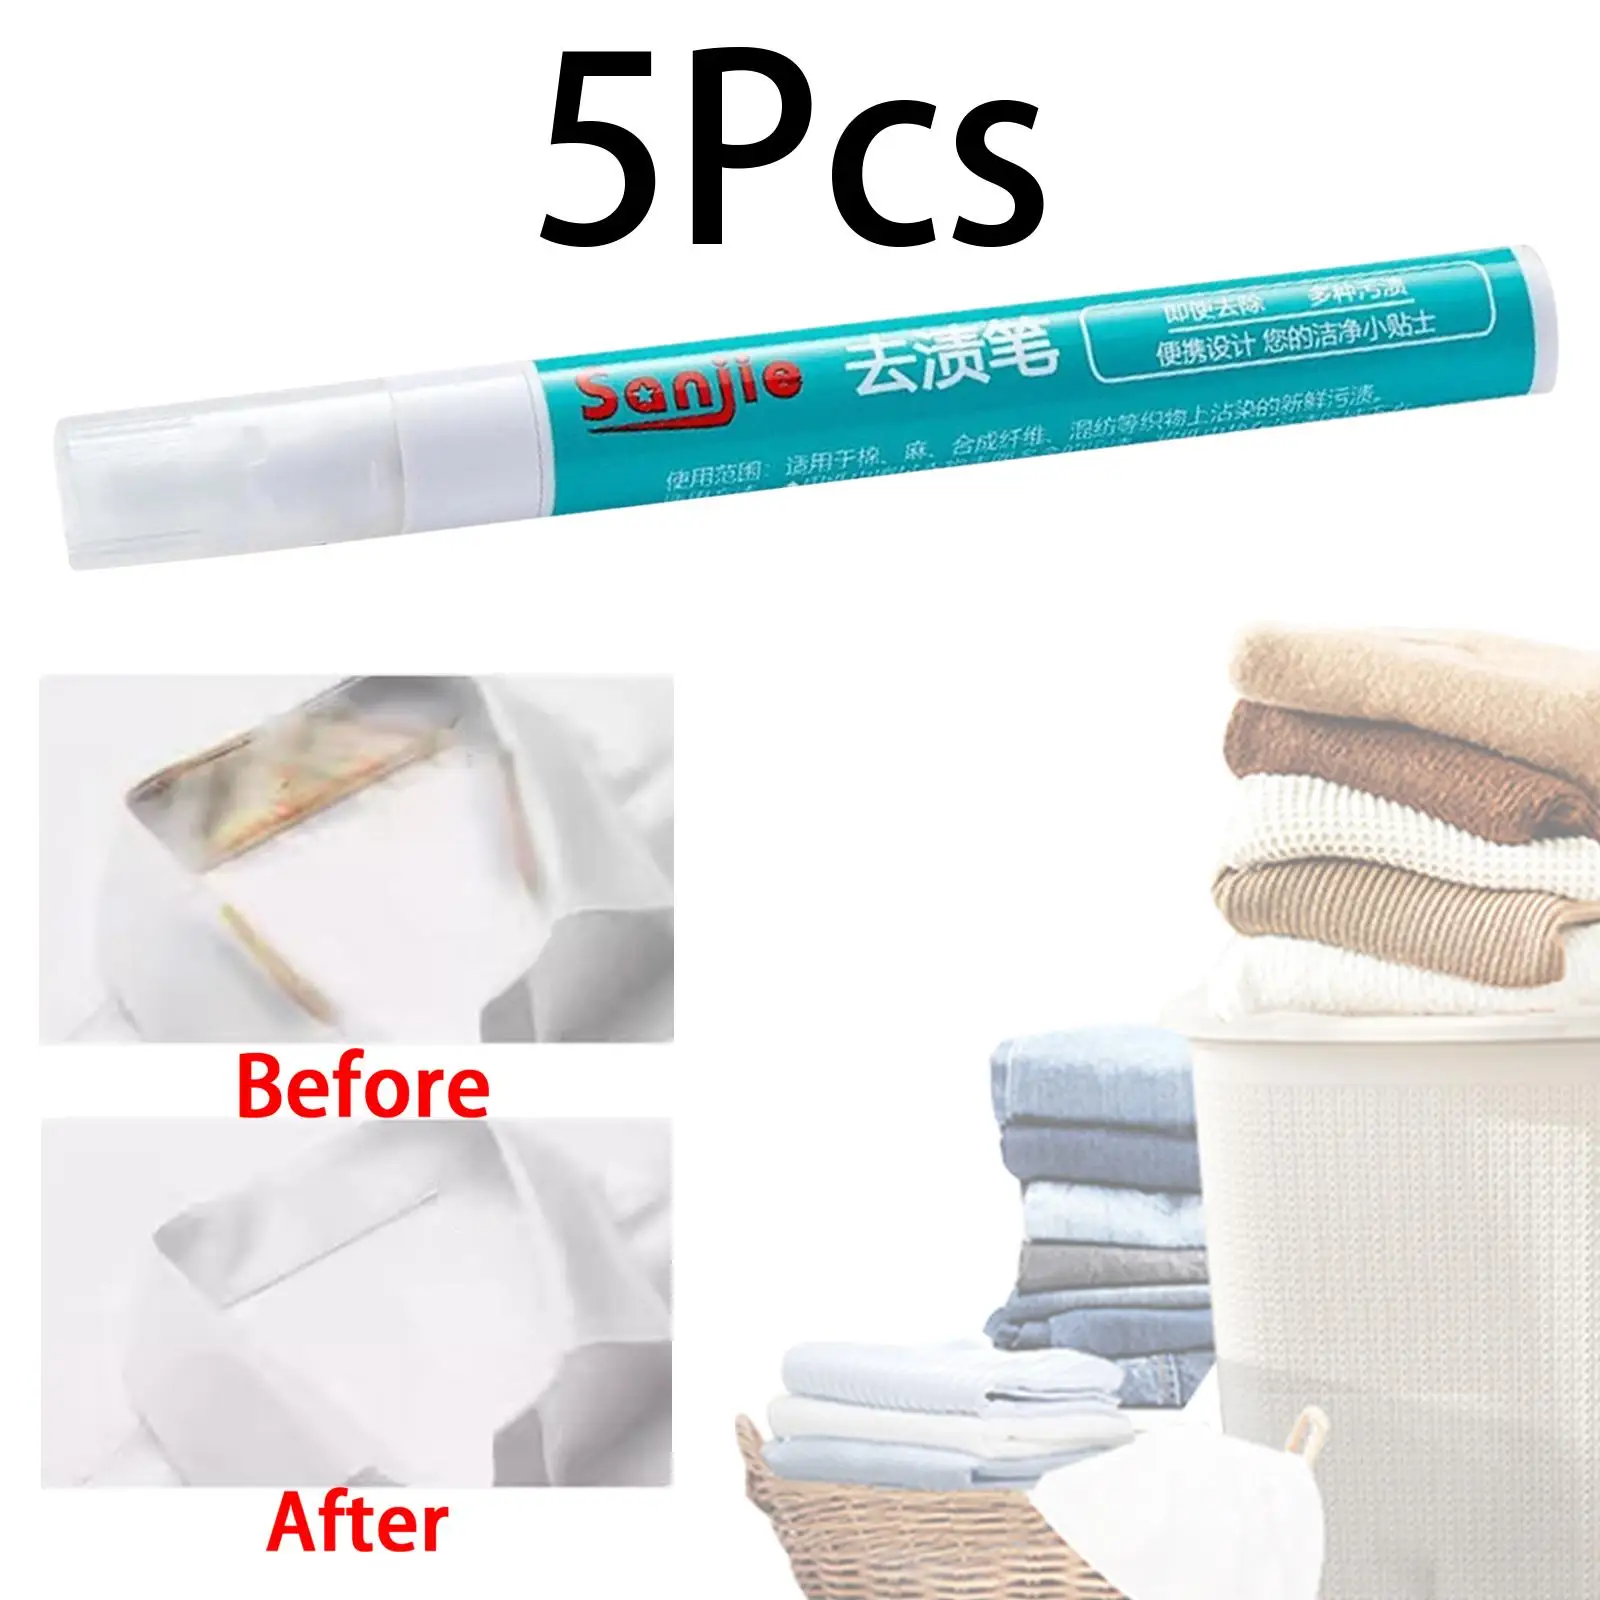 

5x Portable Clothing Stain Removal Pen Instant Pen Spot Stain Remover Pen for Laundry Stains Makeup Drinks Oil Tea Stains